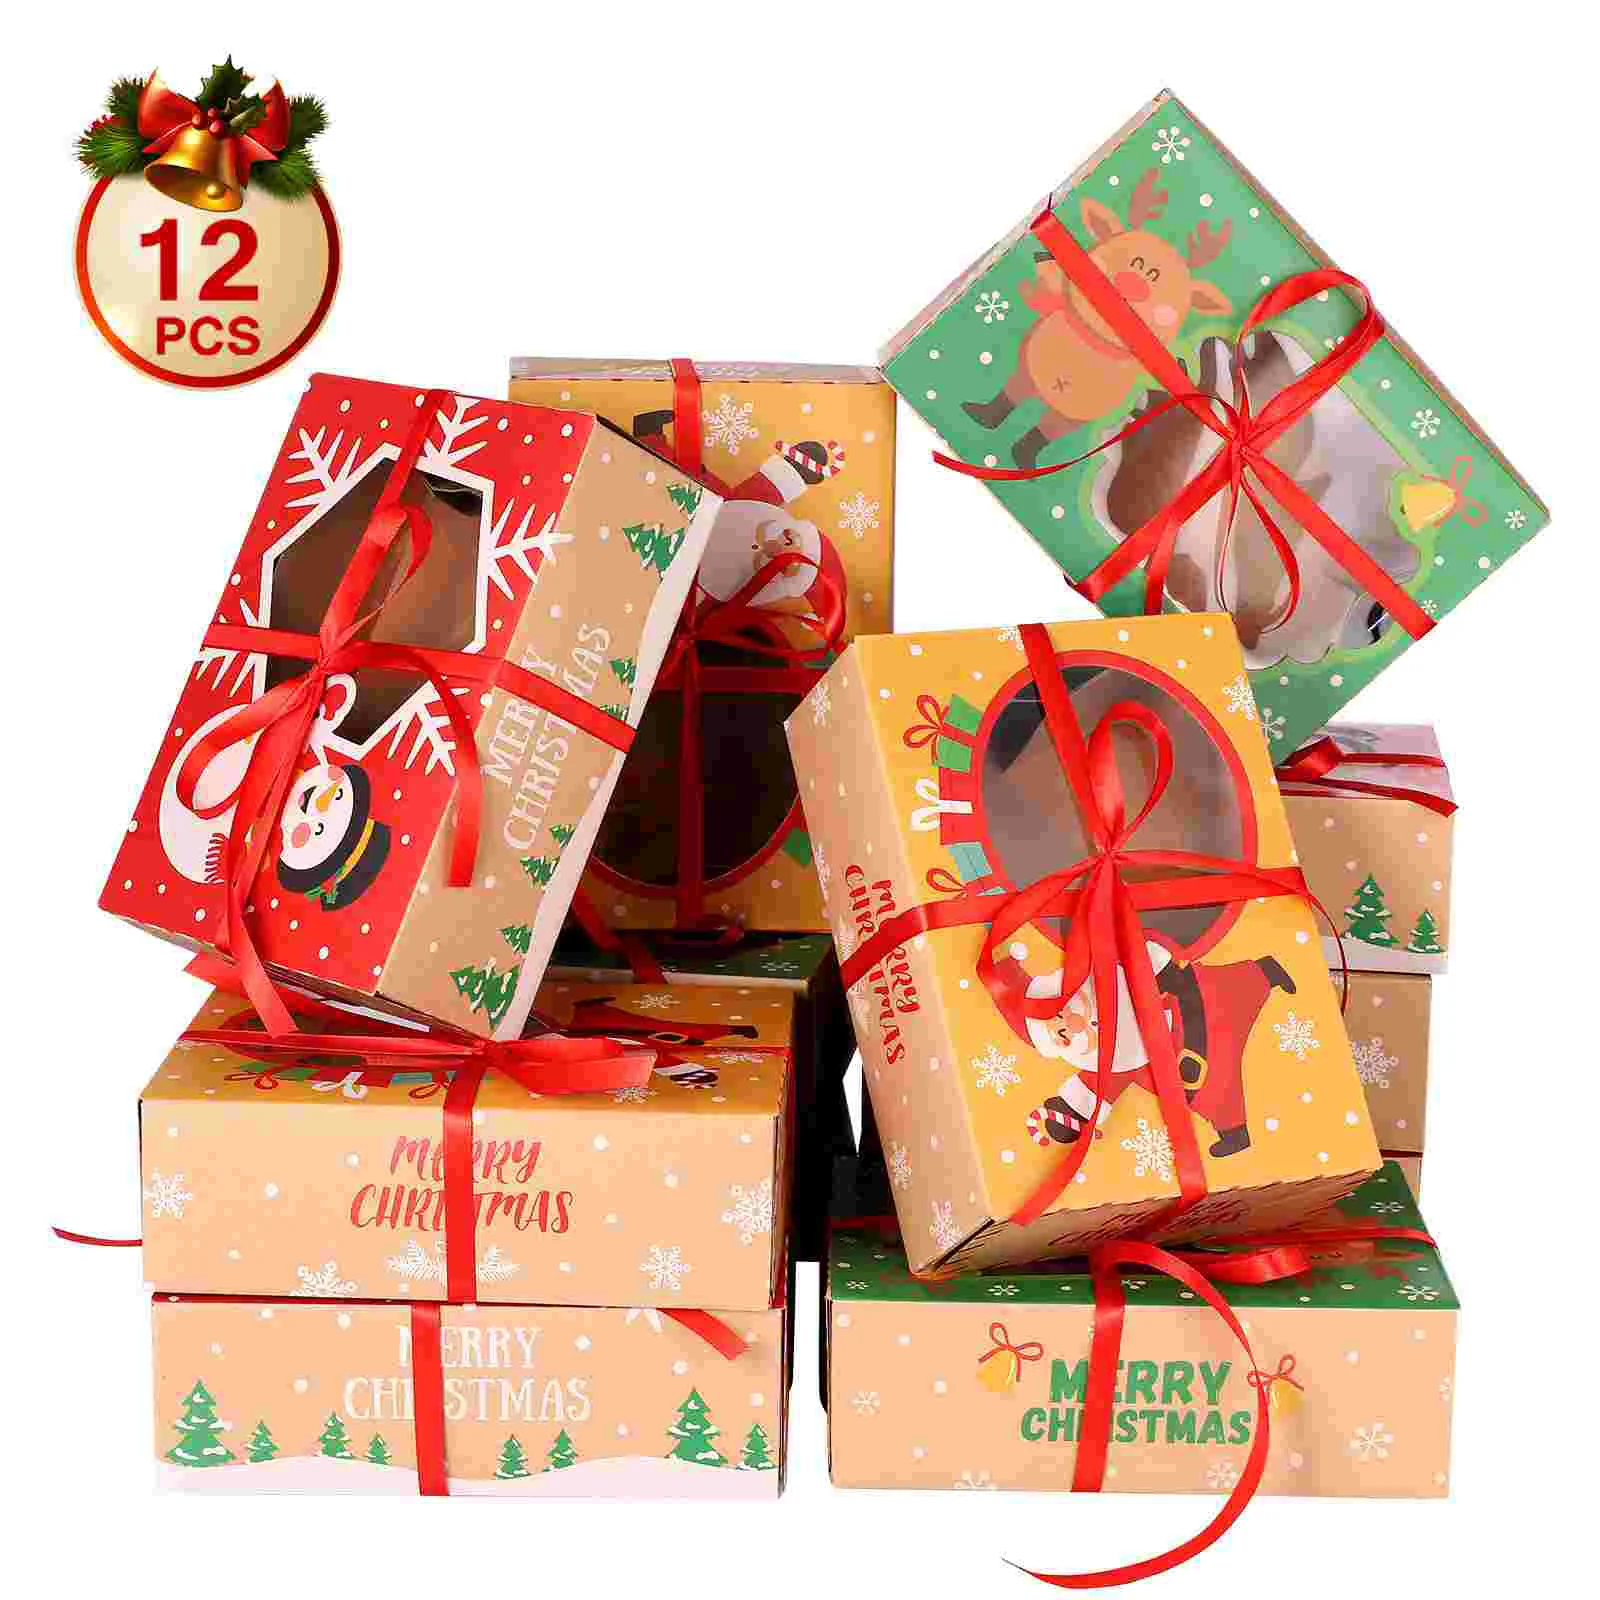 

12pcs Christmas Cookie Boxes Kraft Paper Christmas Candy Treat Boxes Party Favor Boxes Xmas Holiday Party Supplies with Ribbons